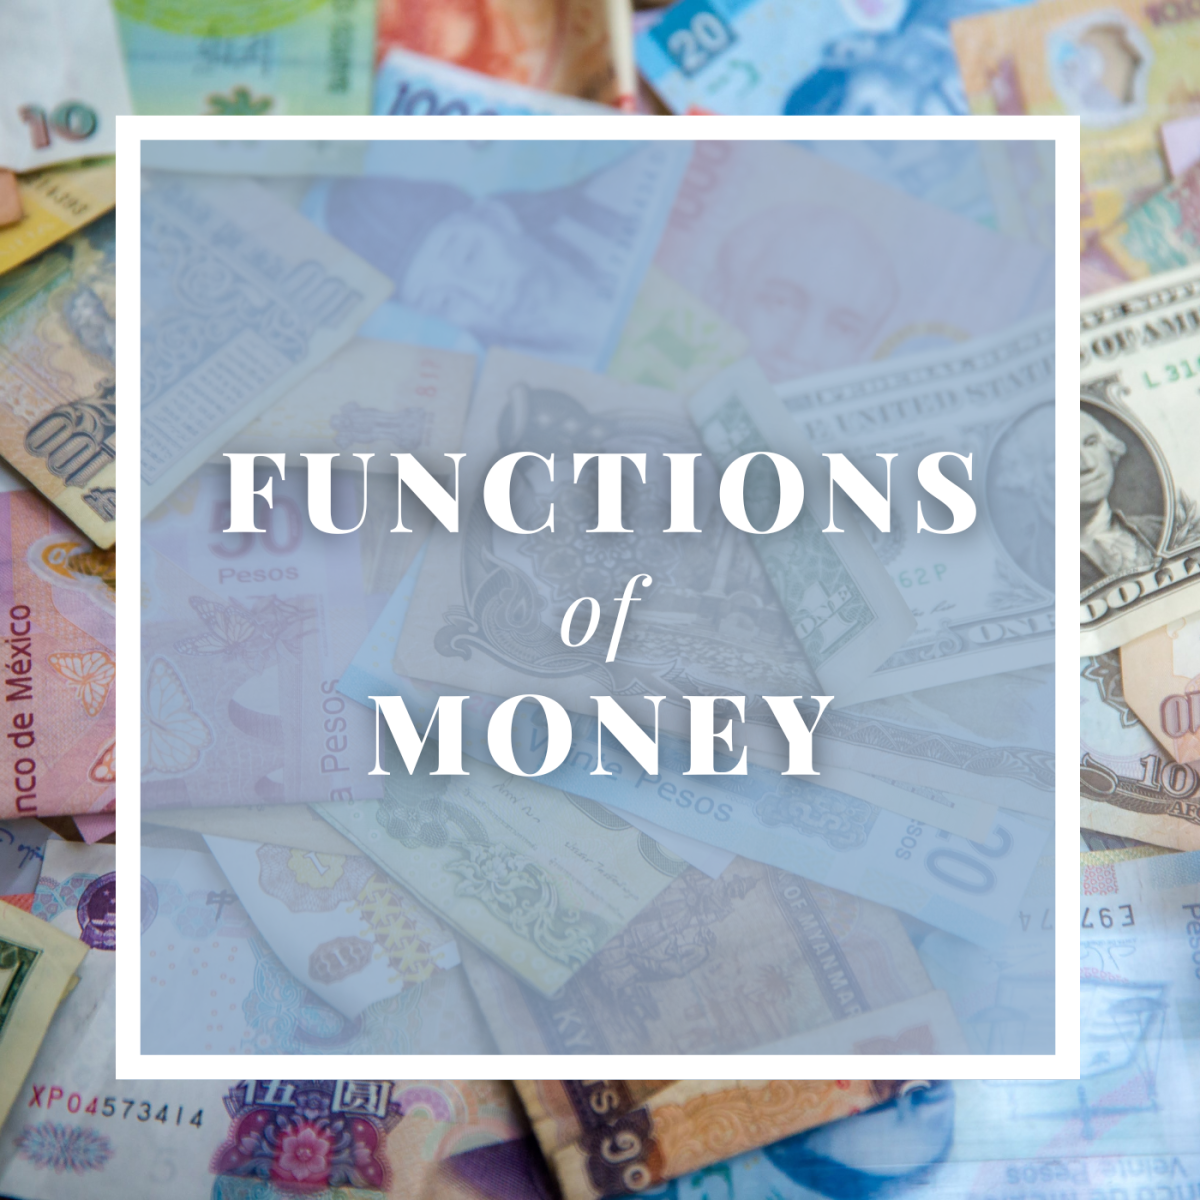 Functions of money in an economic system.